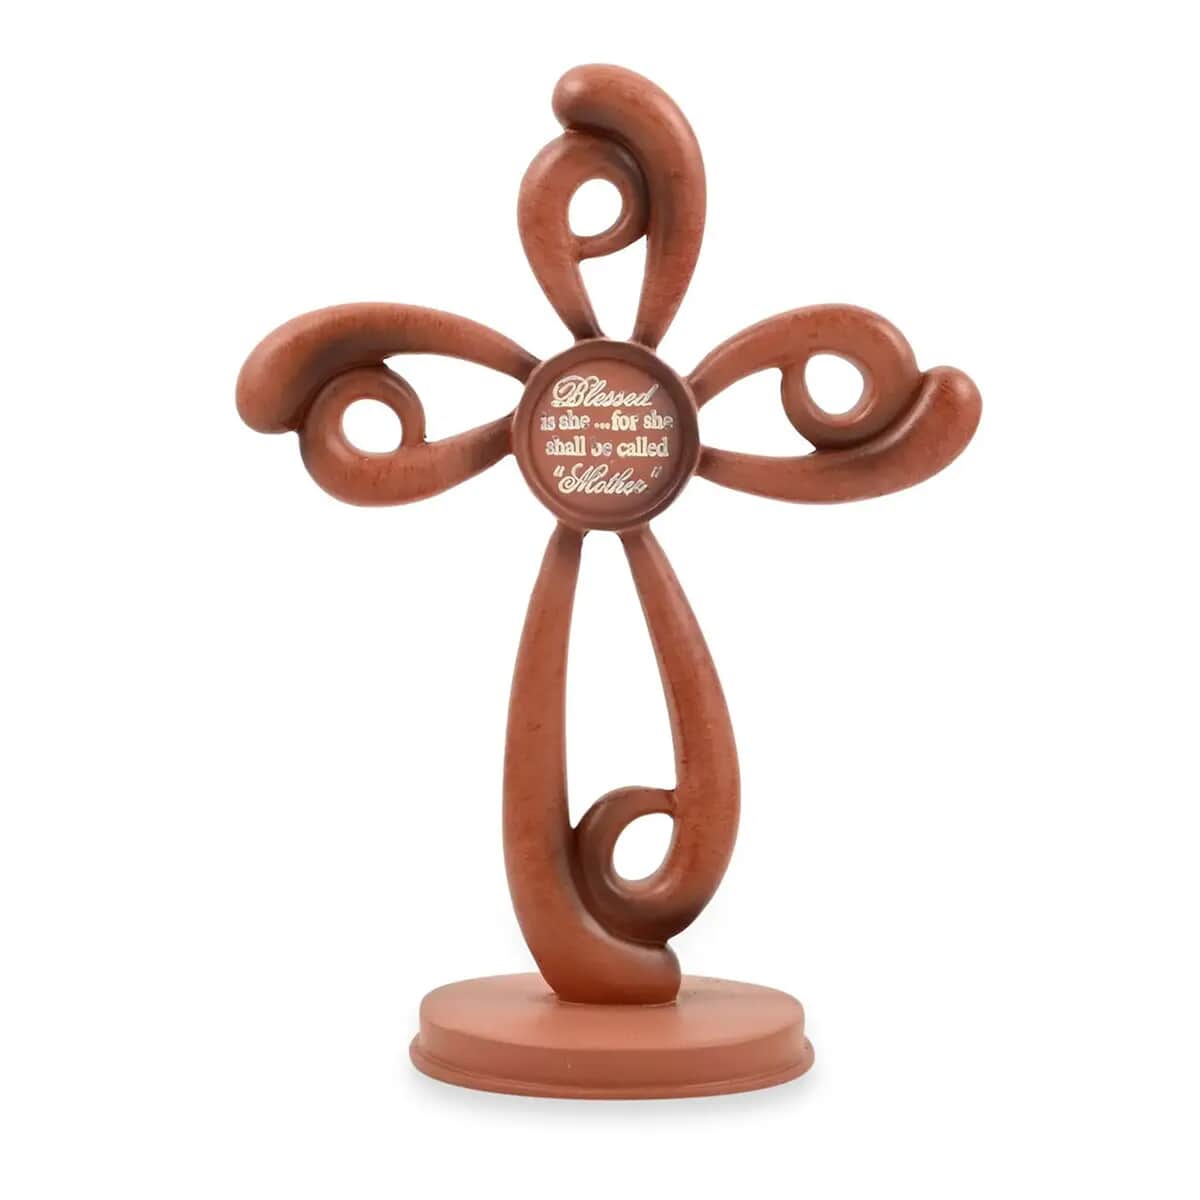 Dickson's Tabletop Cross Figurine For Gifts Home Decoration, Resin Cross Statue, Decorative Cross For Home, Office, Tabletop, Kitchen -Mother Blessed 6.75 image number 0